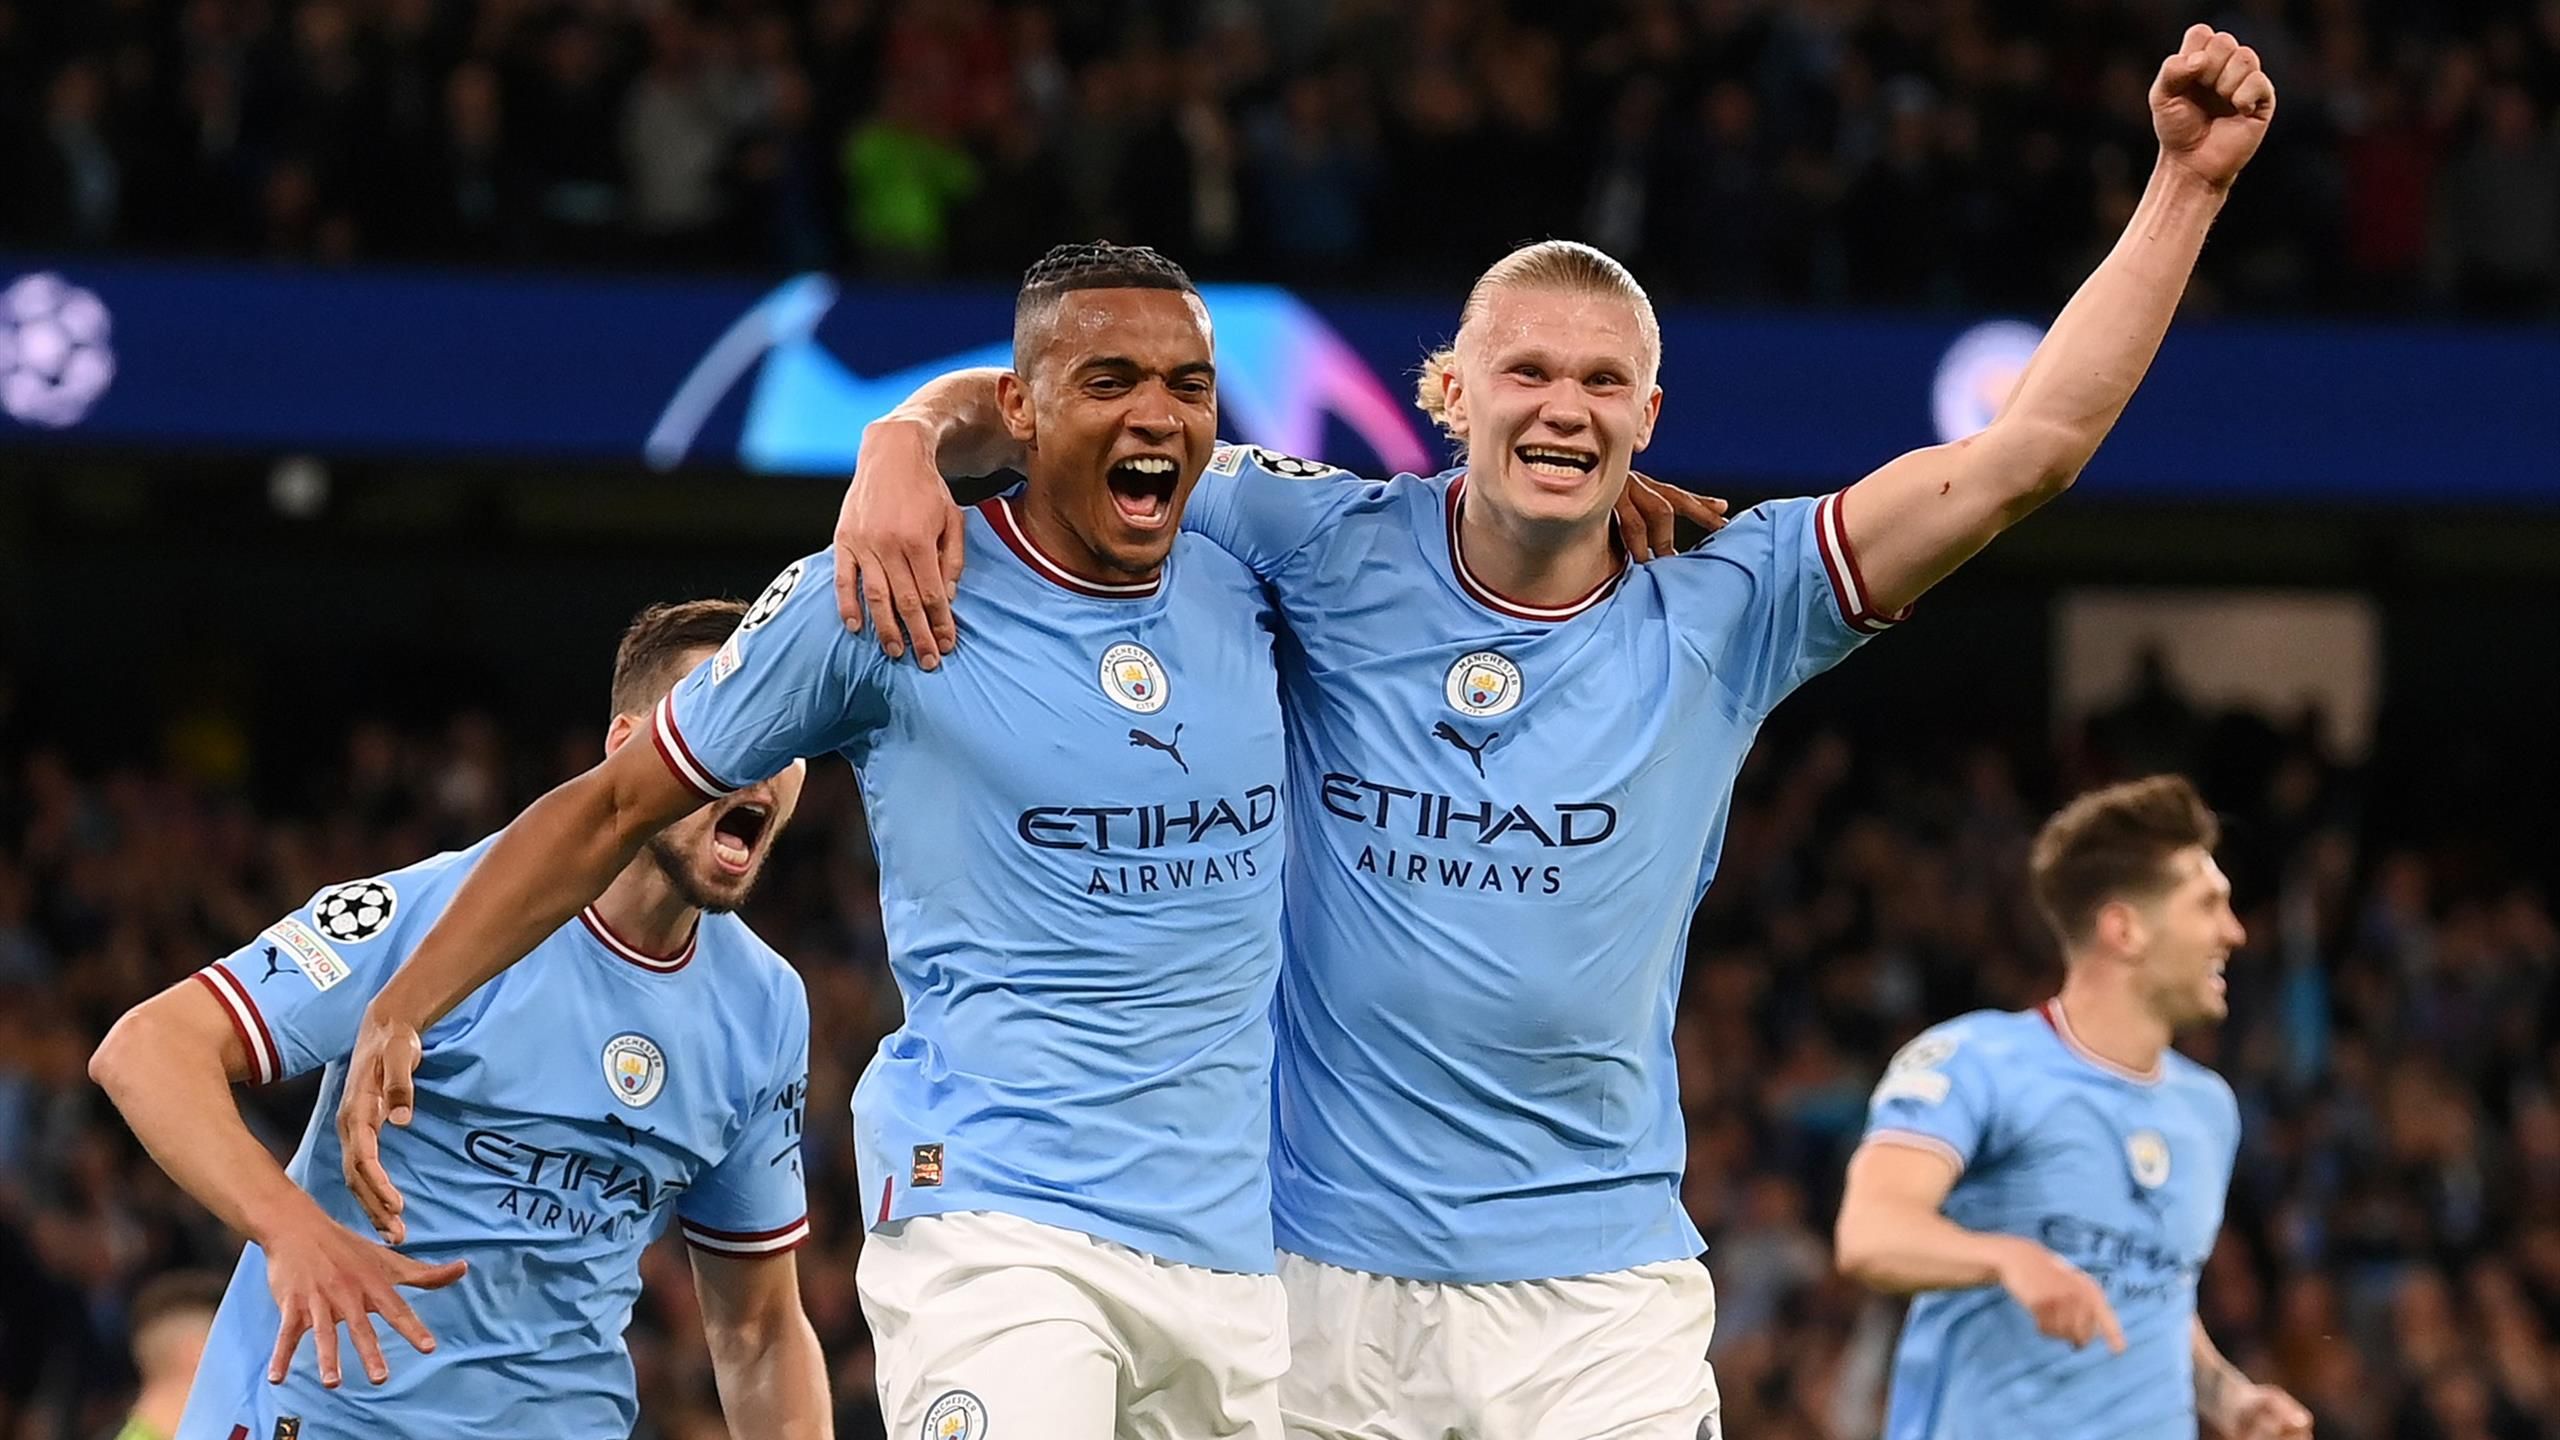 The key games on Manchester City's road to becoming Premier League  champions